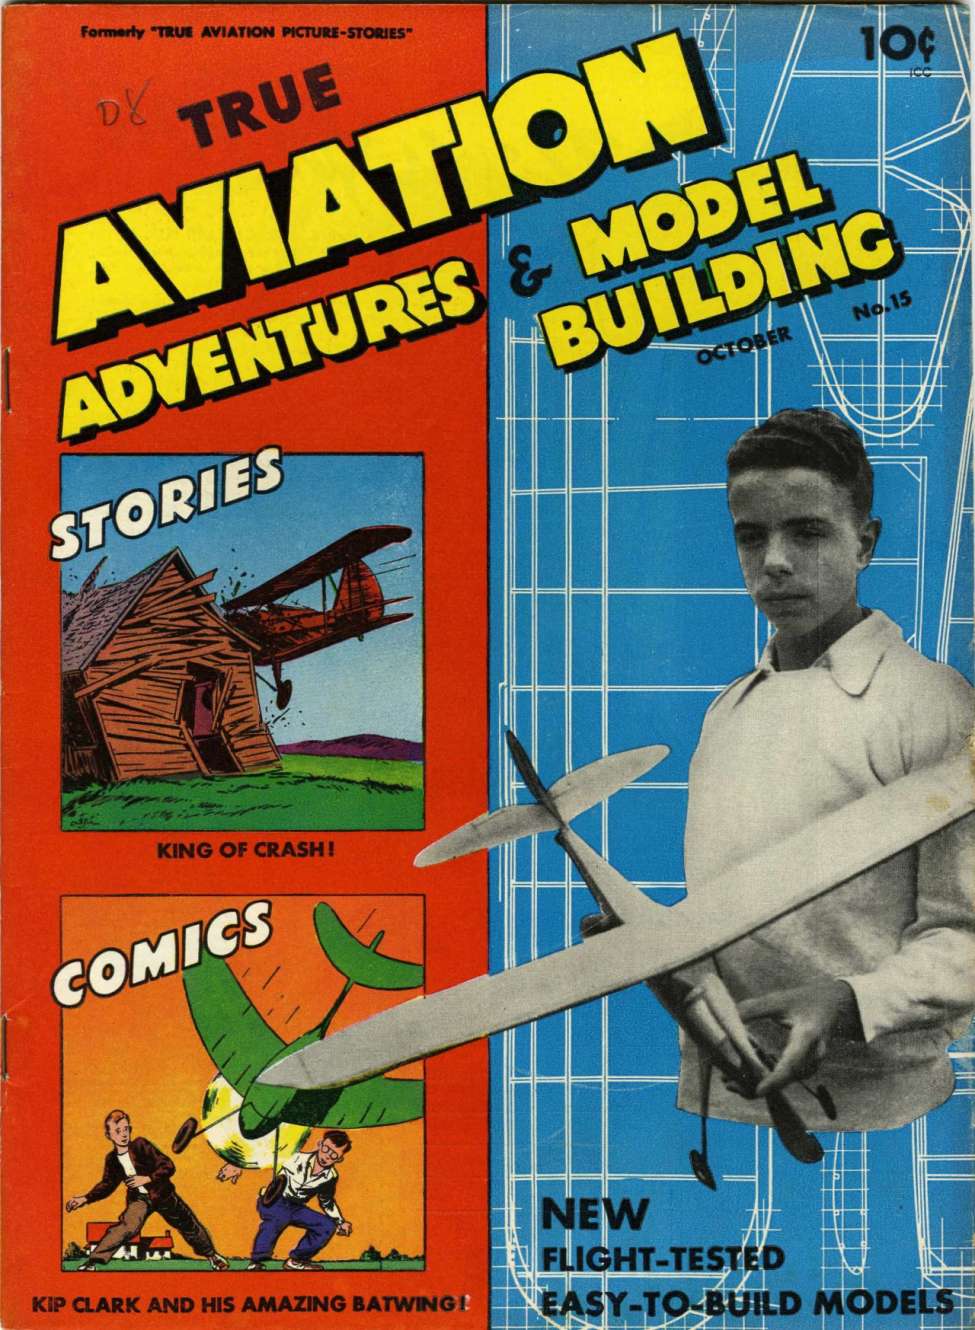 Book Cover For True Aviation Picture Stories 15